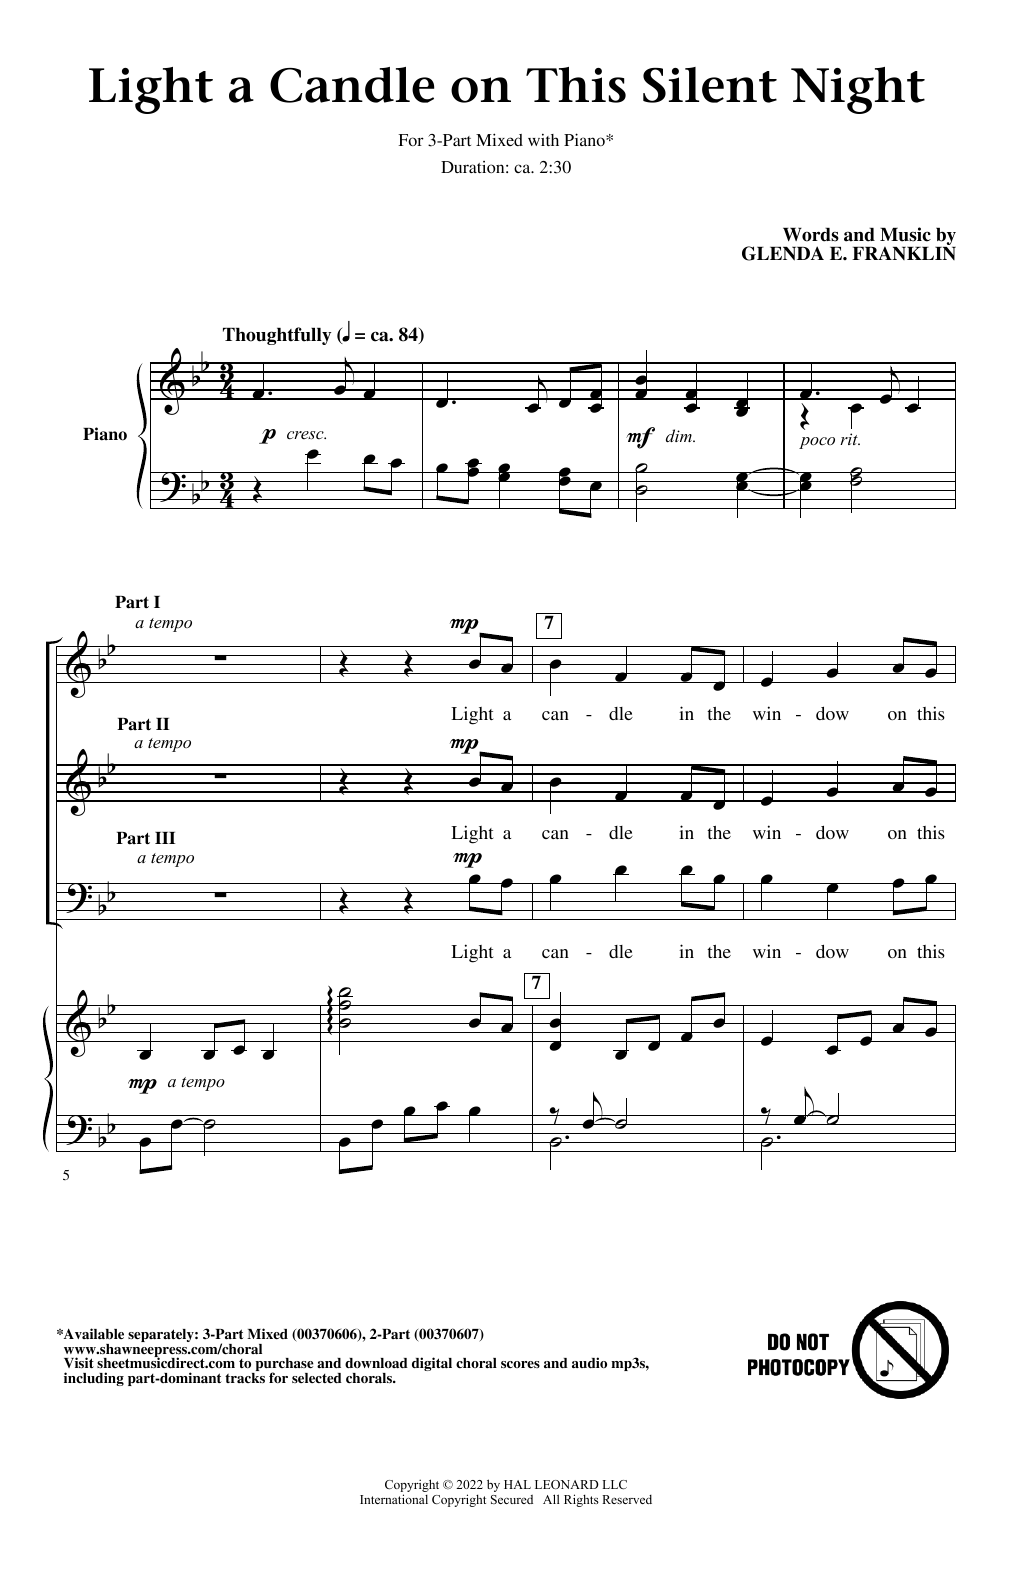 Download Glenda E. Franklin Light A Candle On This Silent Night Sheet Music